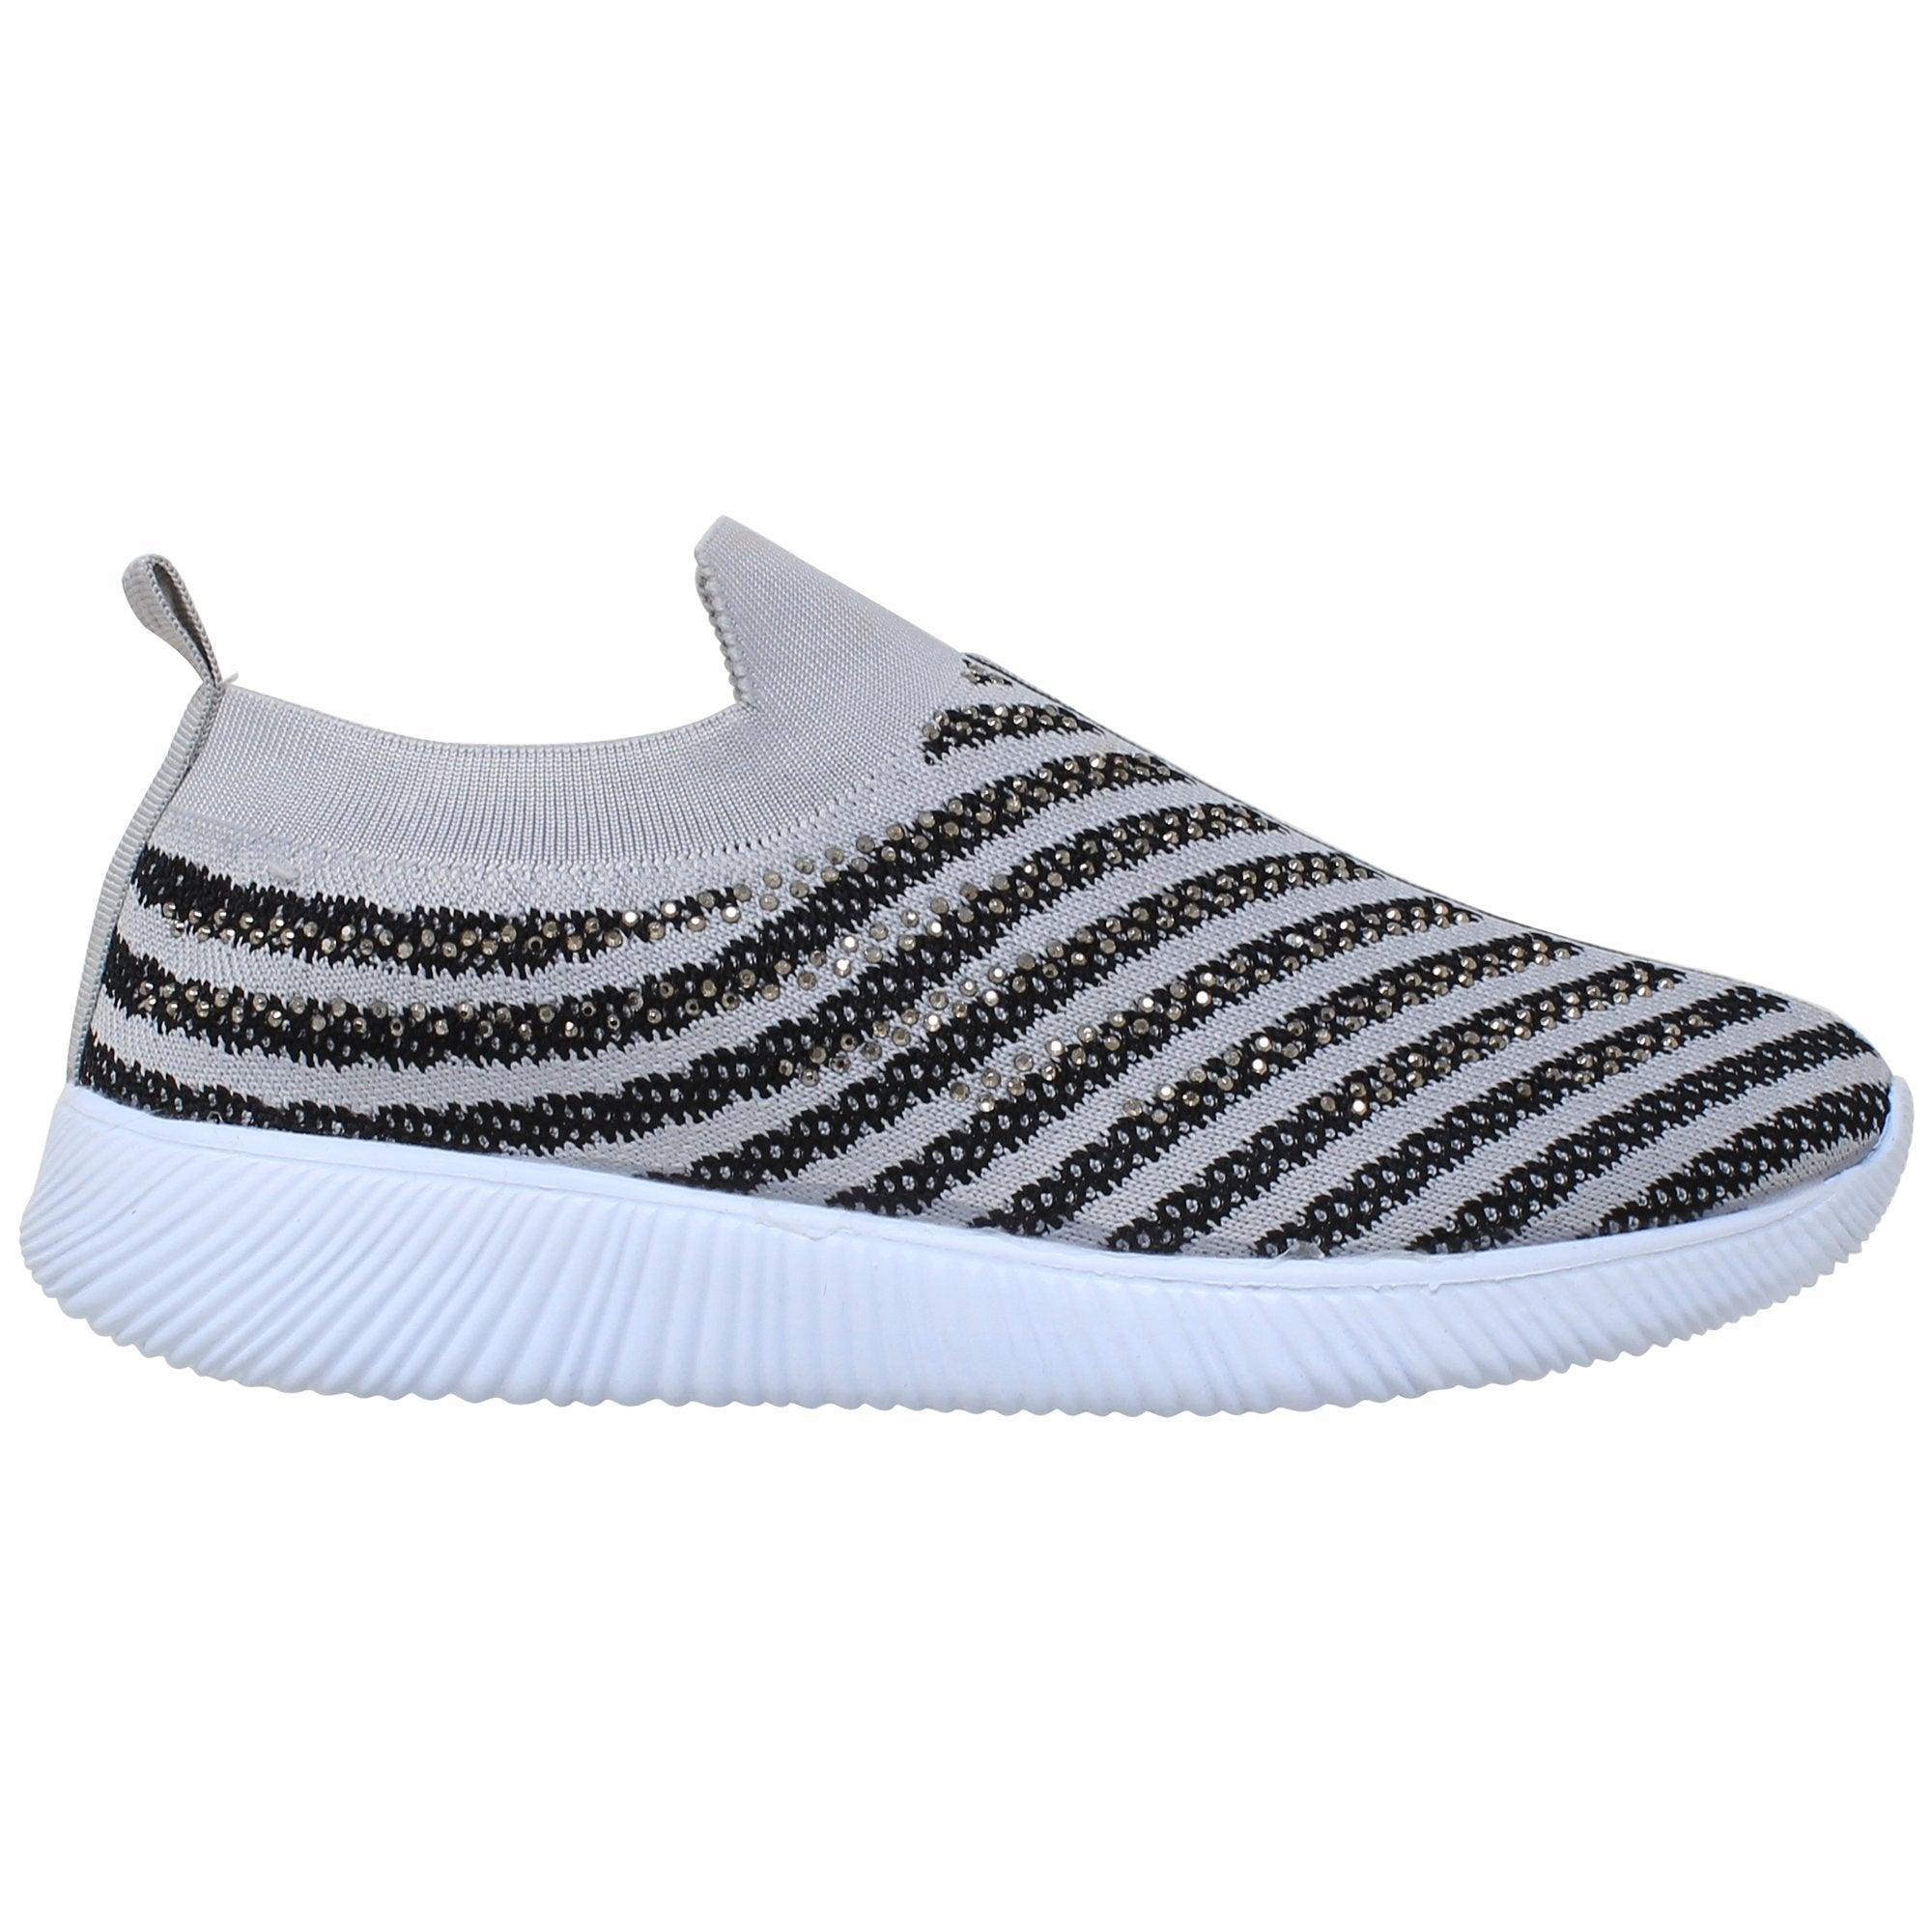 Women's Shoes - Sneakers Womens Sneakers Rhinestone Striped Accent Gray Running Shoes